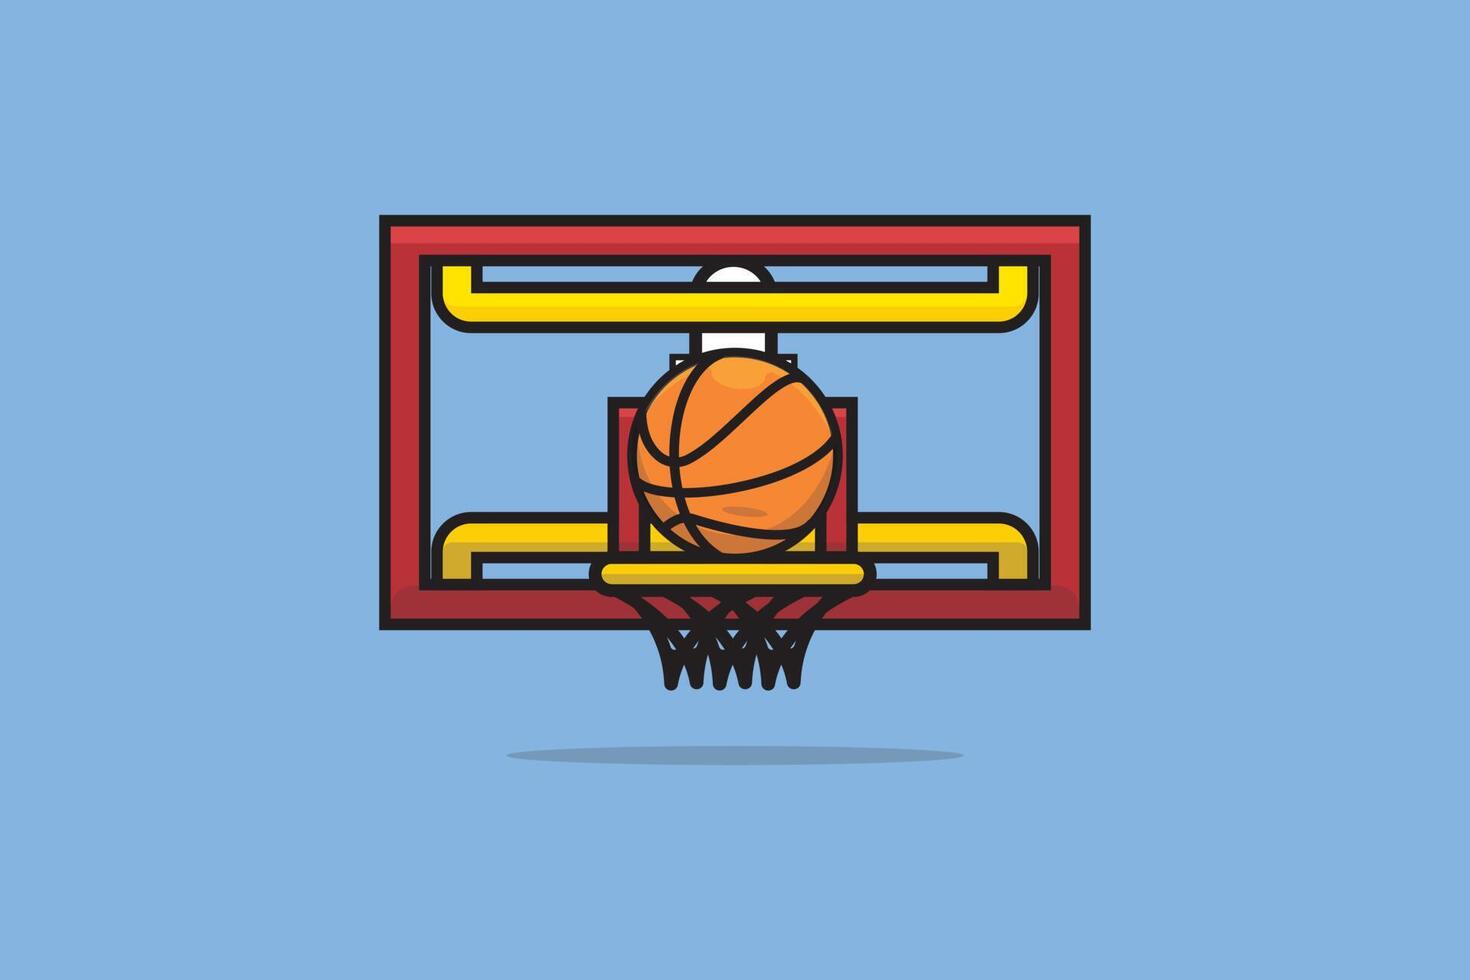 Basketball hoop and ball vector illustration. Sport object icon concept. Colorful Basketball net goal vector illustration. Sports round basketball vector design on blue background.